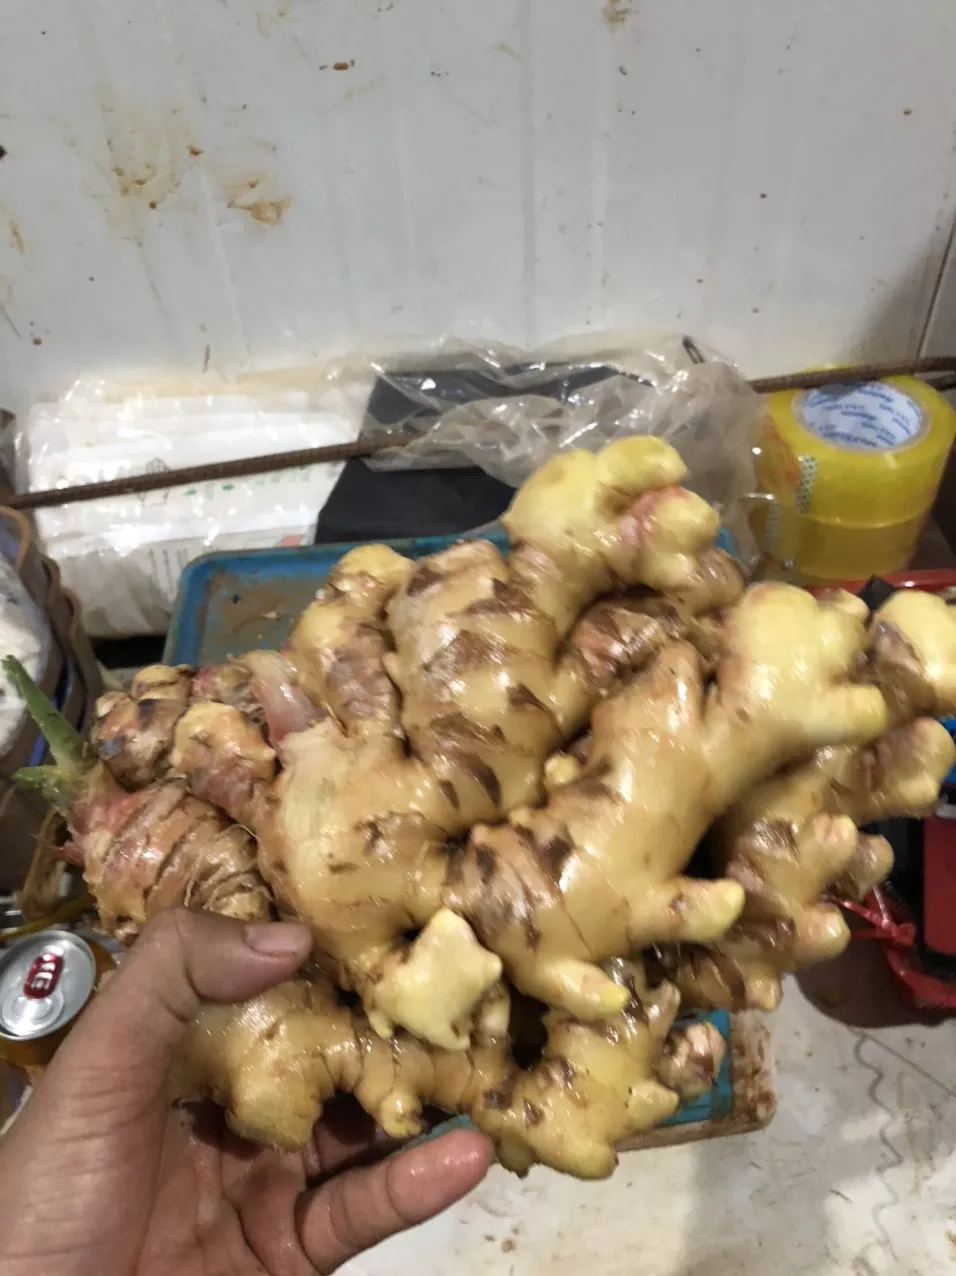 Cheapest Fresh Ginger for export, call +84963818434 whatsaapp contact